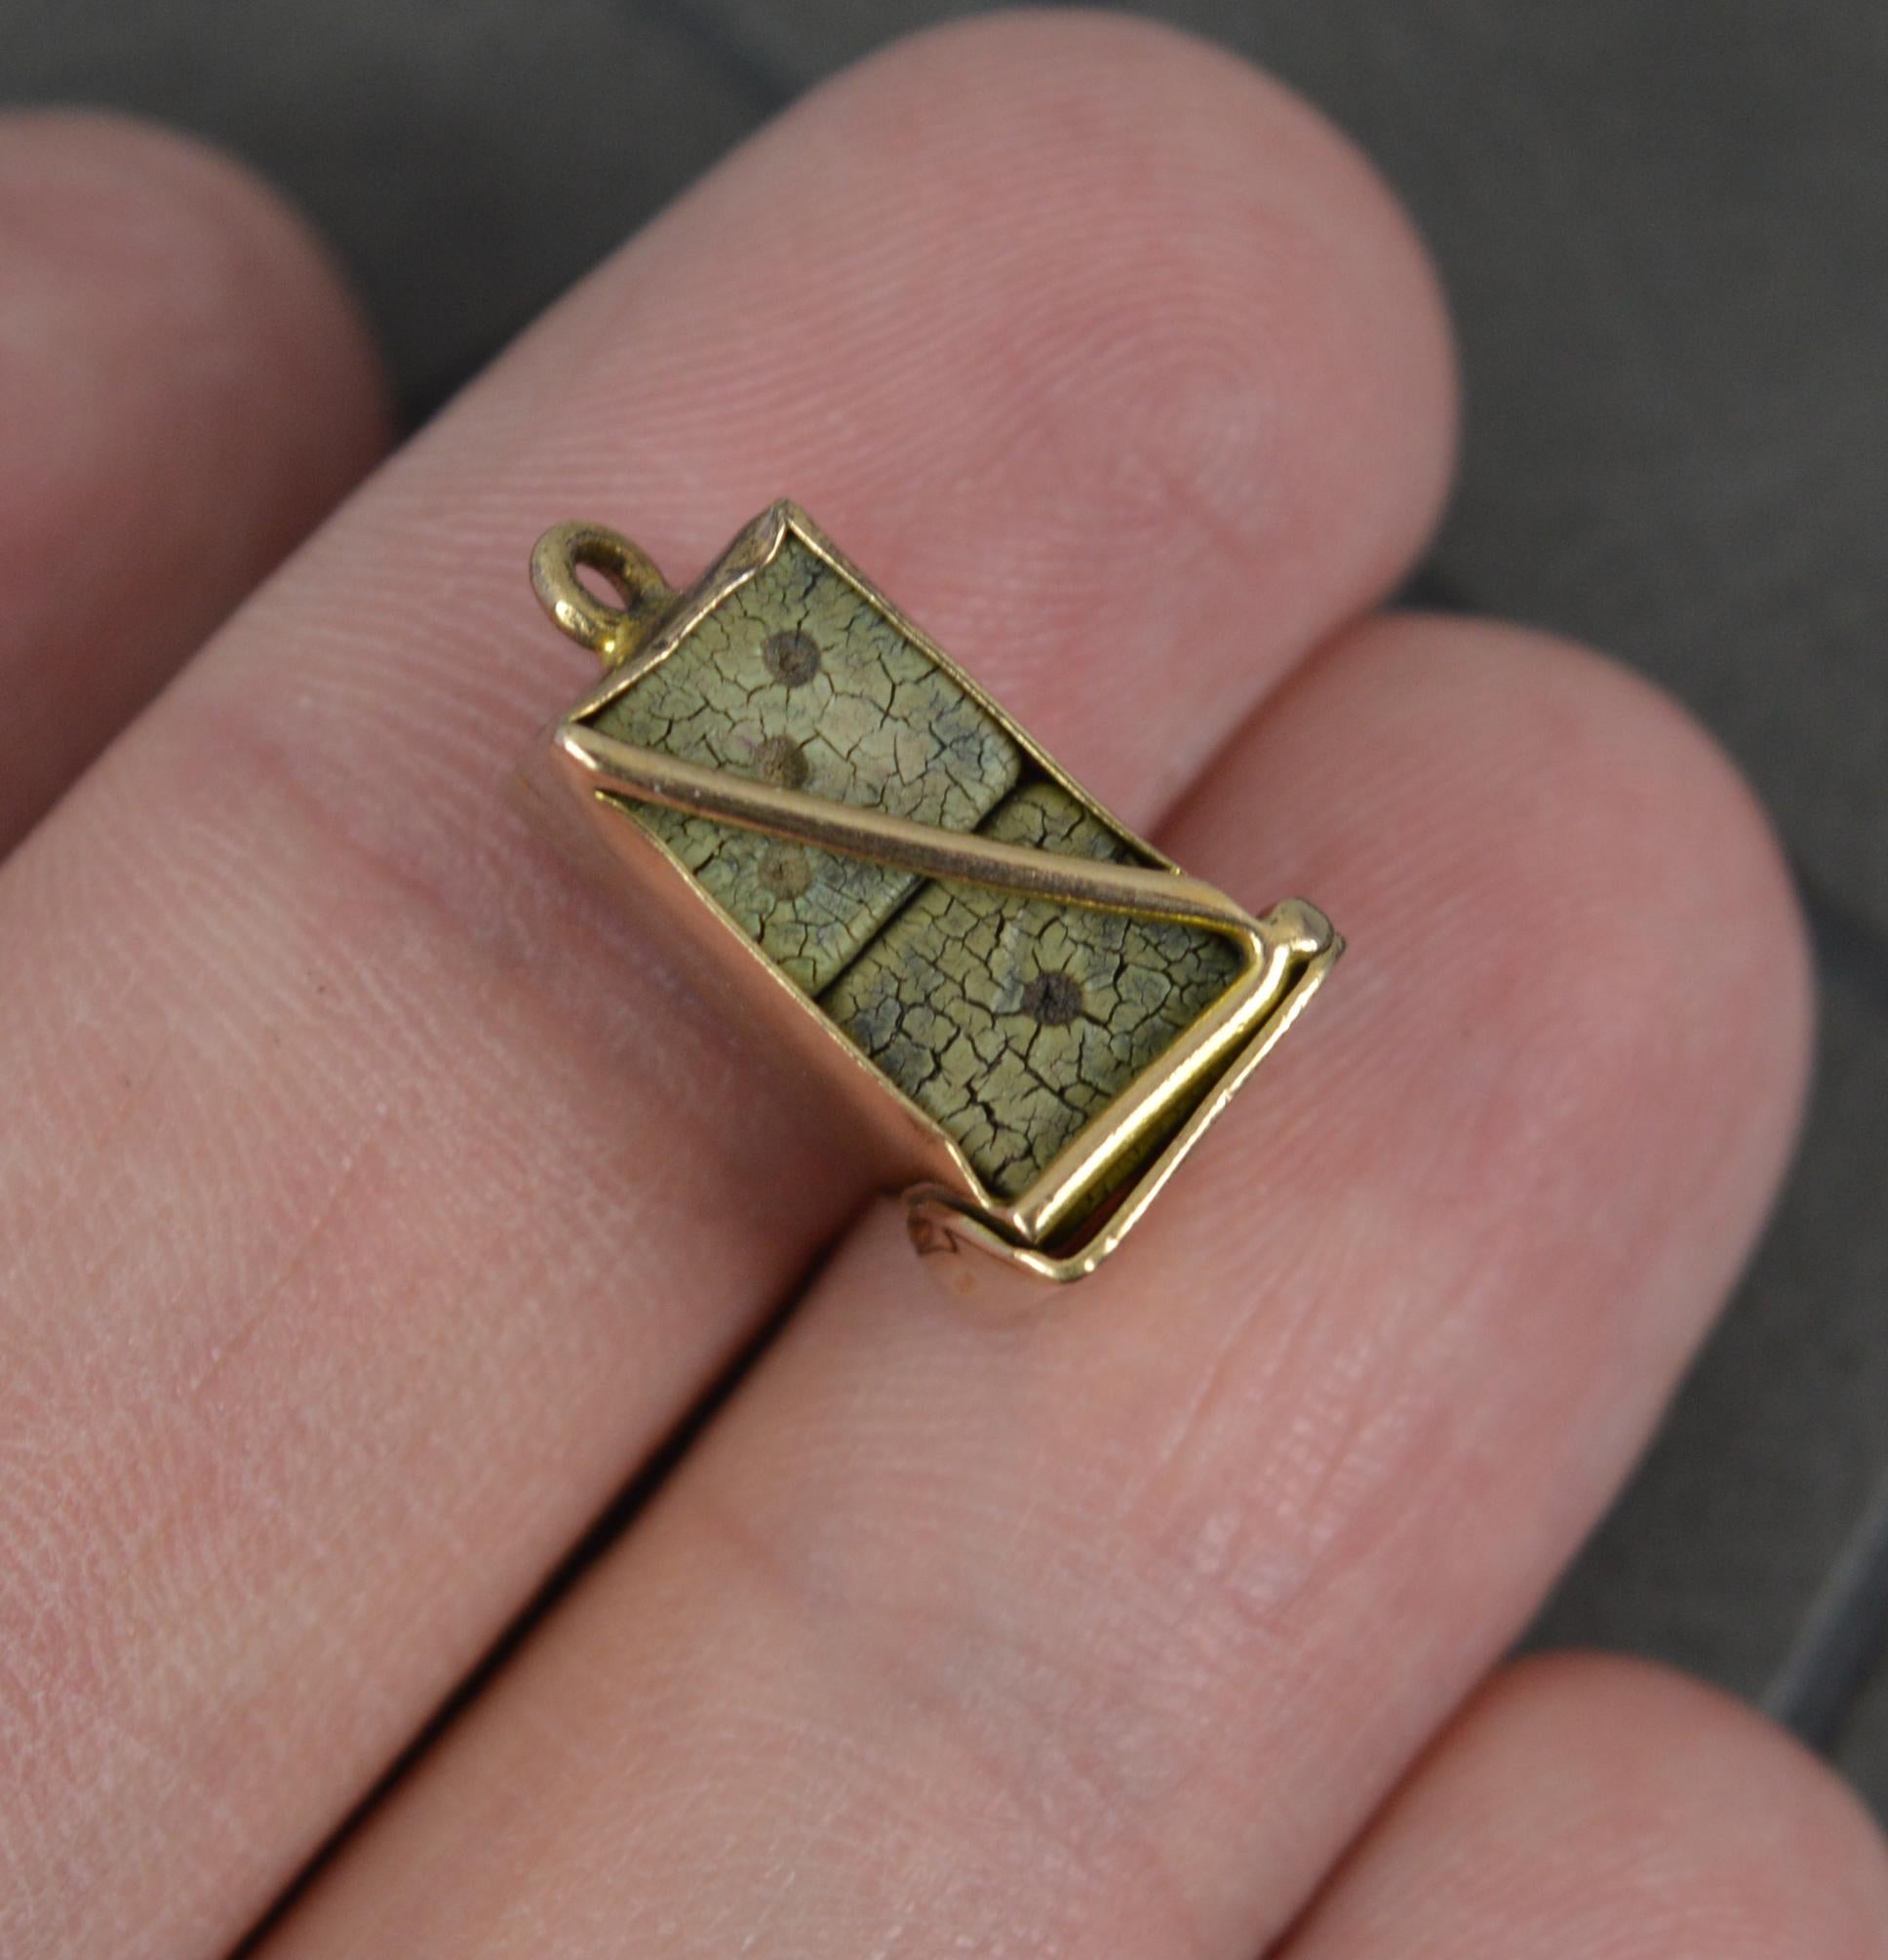 A superb vintage charm pendant.
Solid 9 carat yellow gold example.
Designed to hold a two miniature dice.
1960, London assay.

CONDITION ; Very good. Crisp design. Issue free. Light wear. Please view photographs.
WEIGHT ; 1.3 grams
SIZE ; 12mm x 6mm